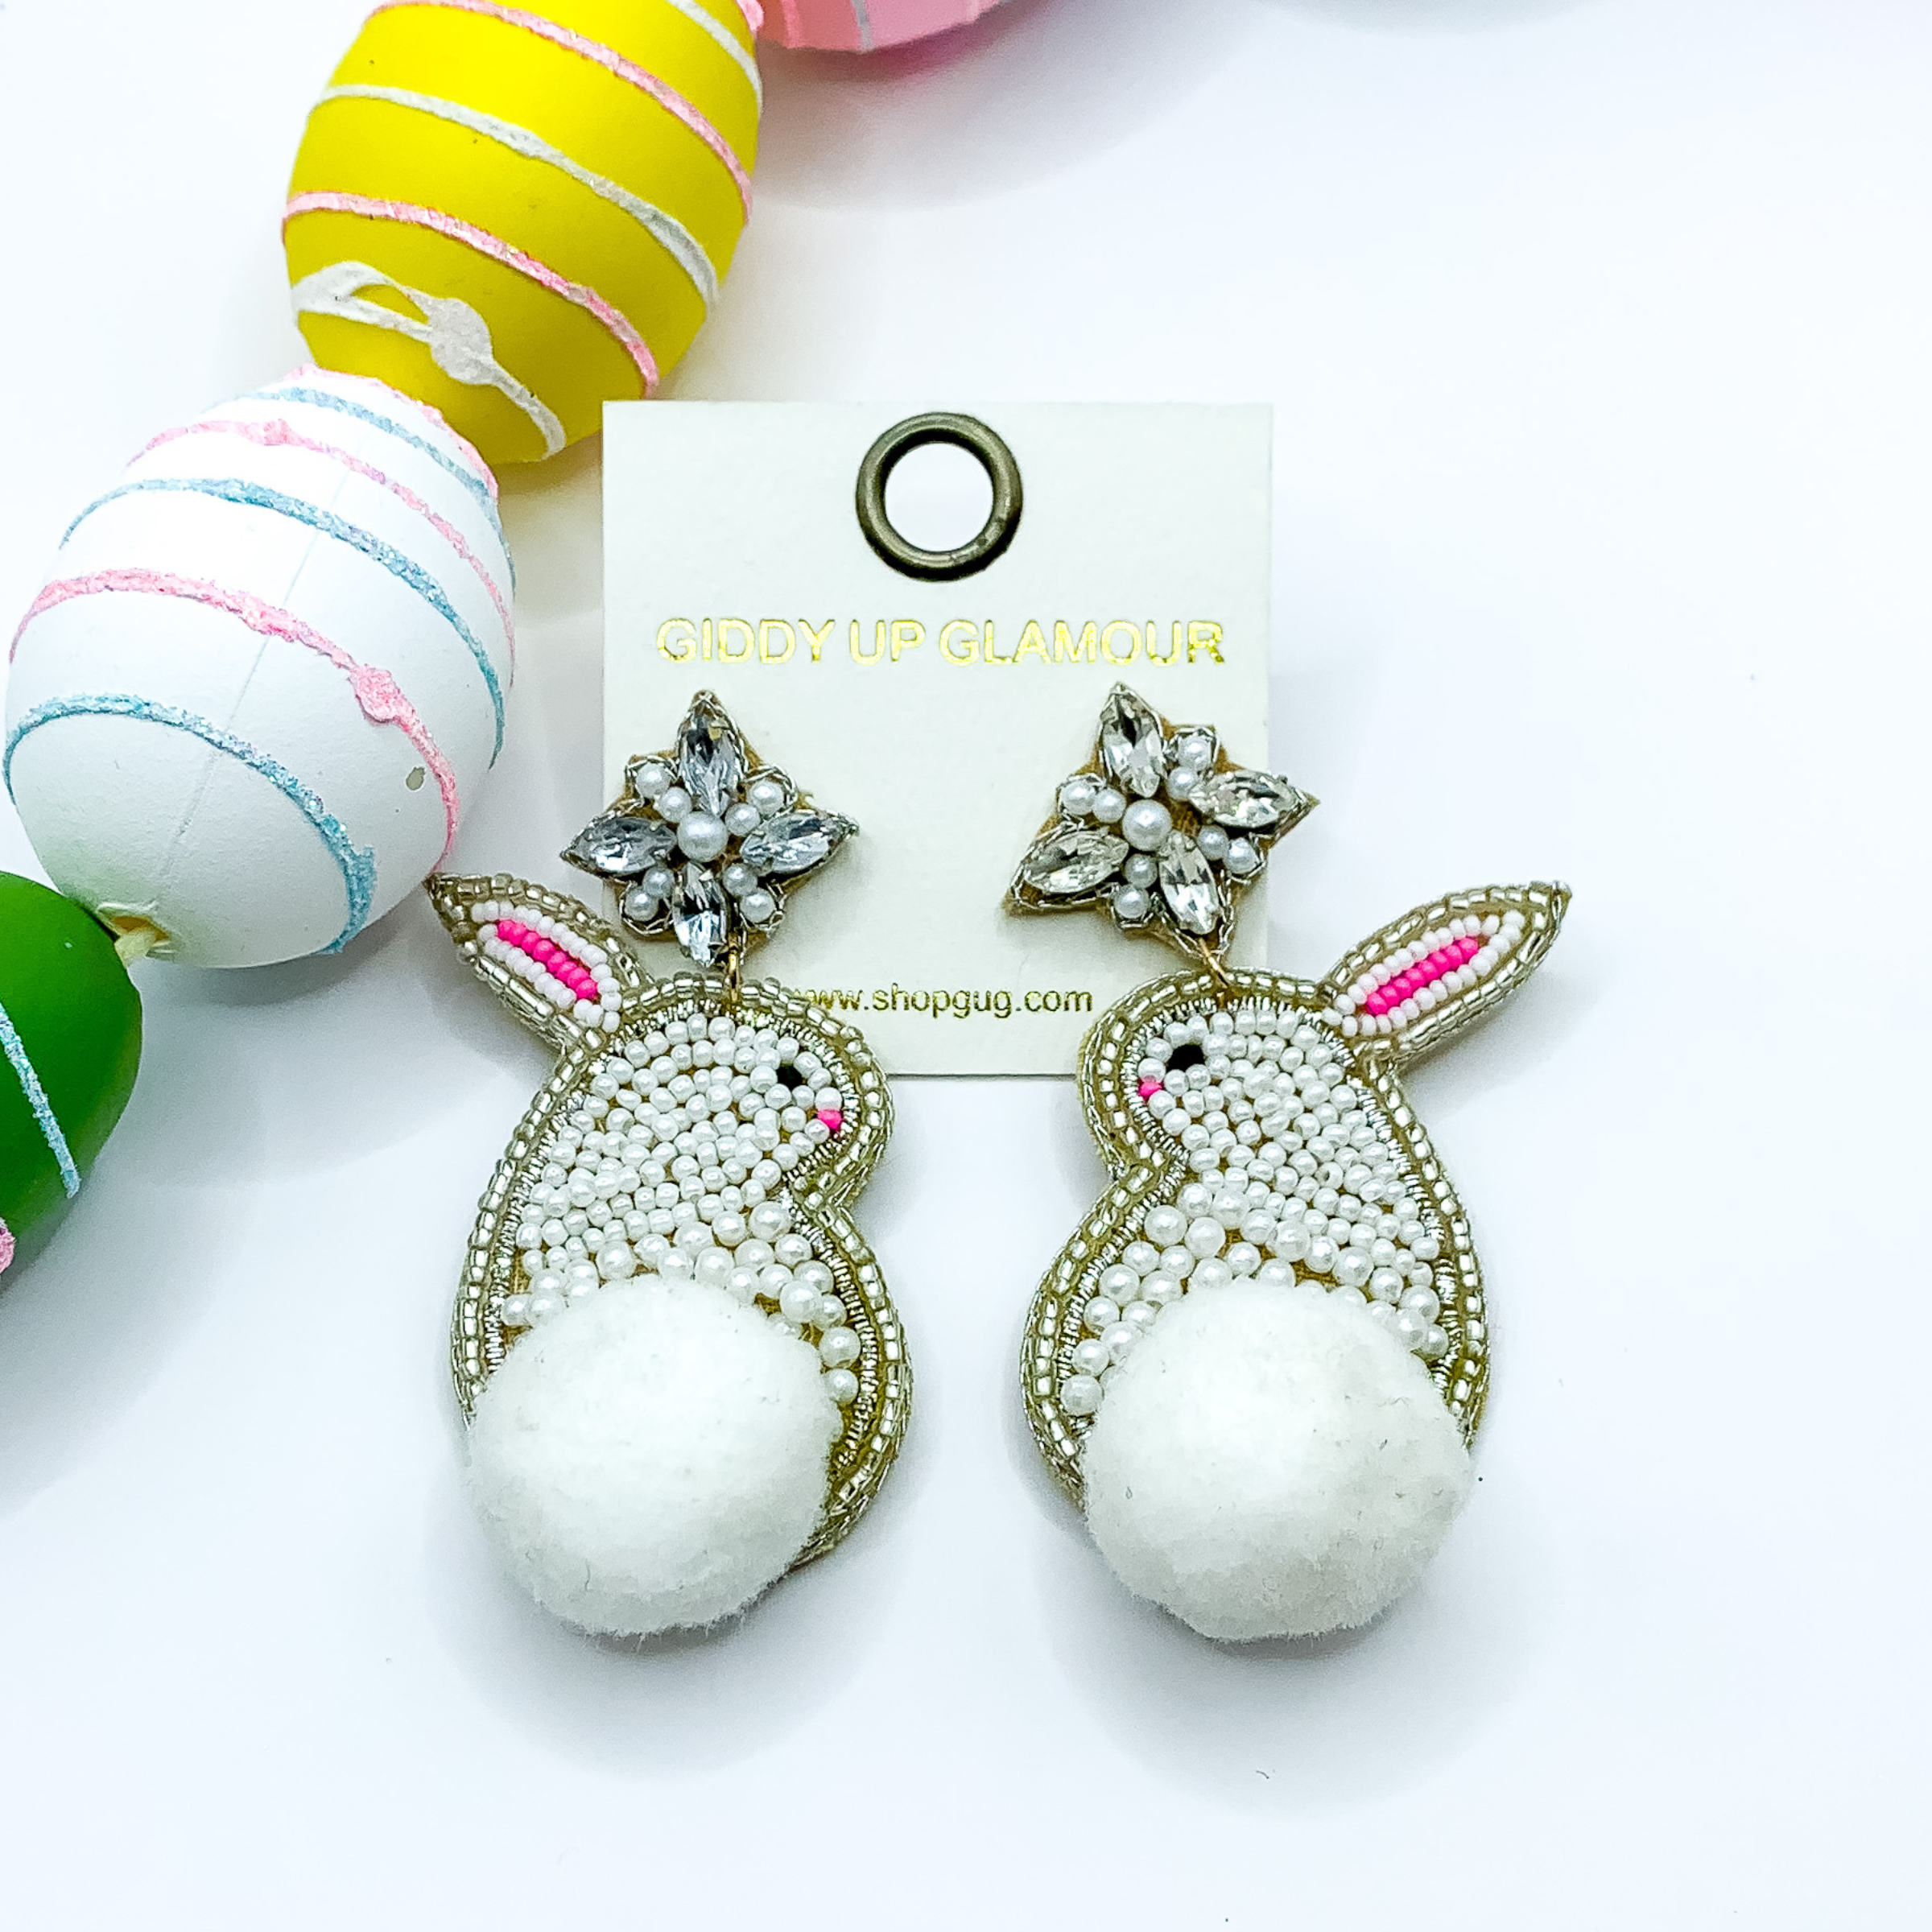 Beaded, white bunny rabbit earrings on a crystal post with a white puff ball for a tail. Pictured on white background with colorful Easter eggs.